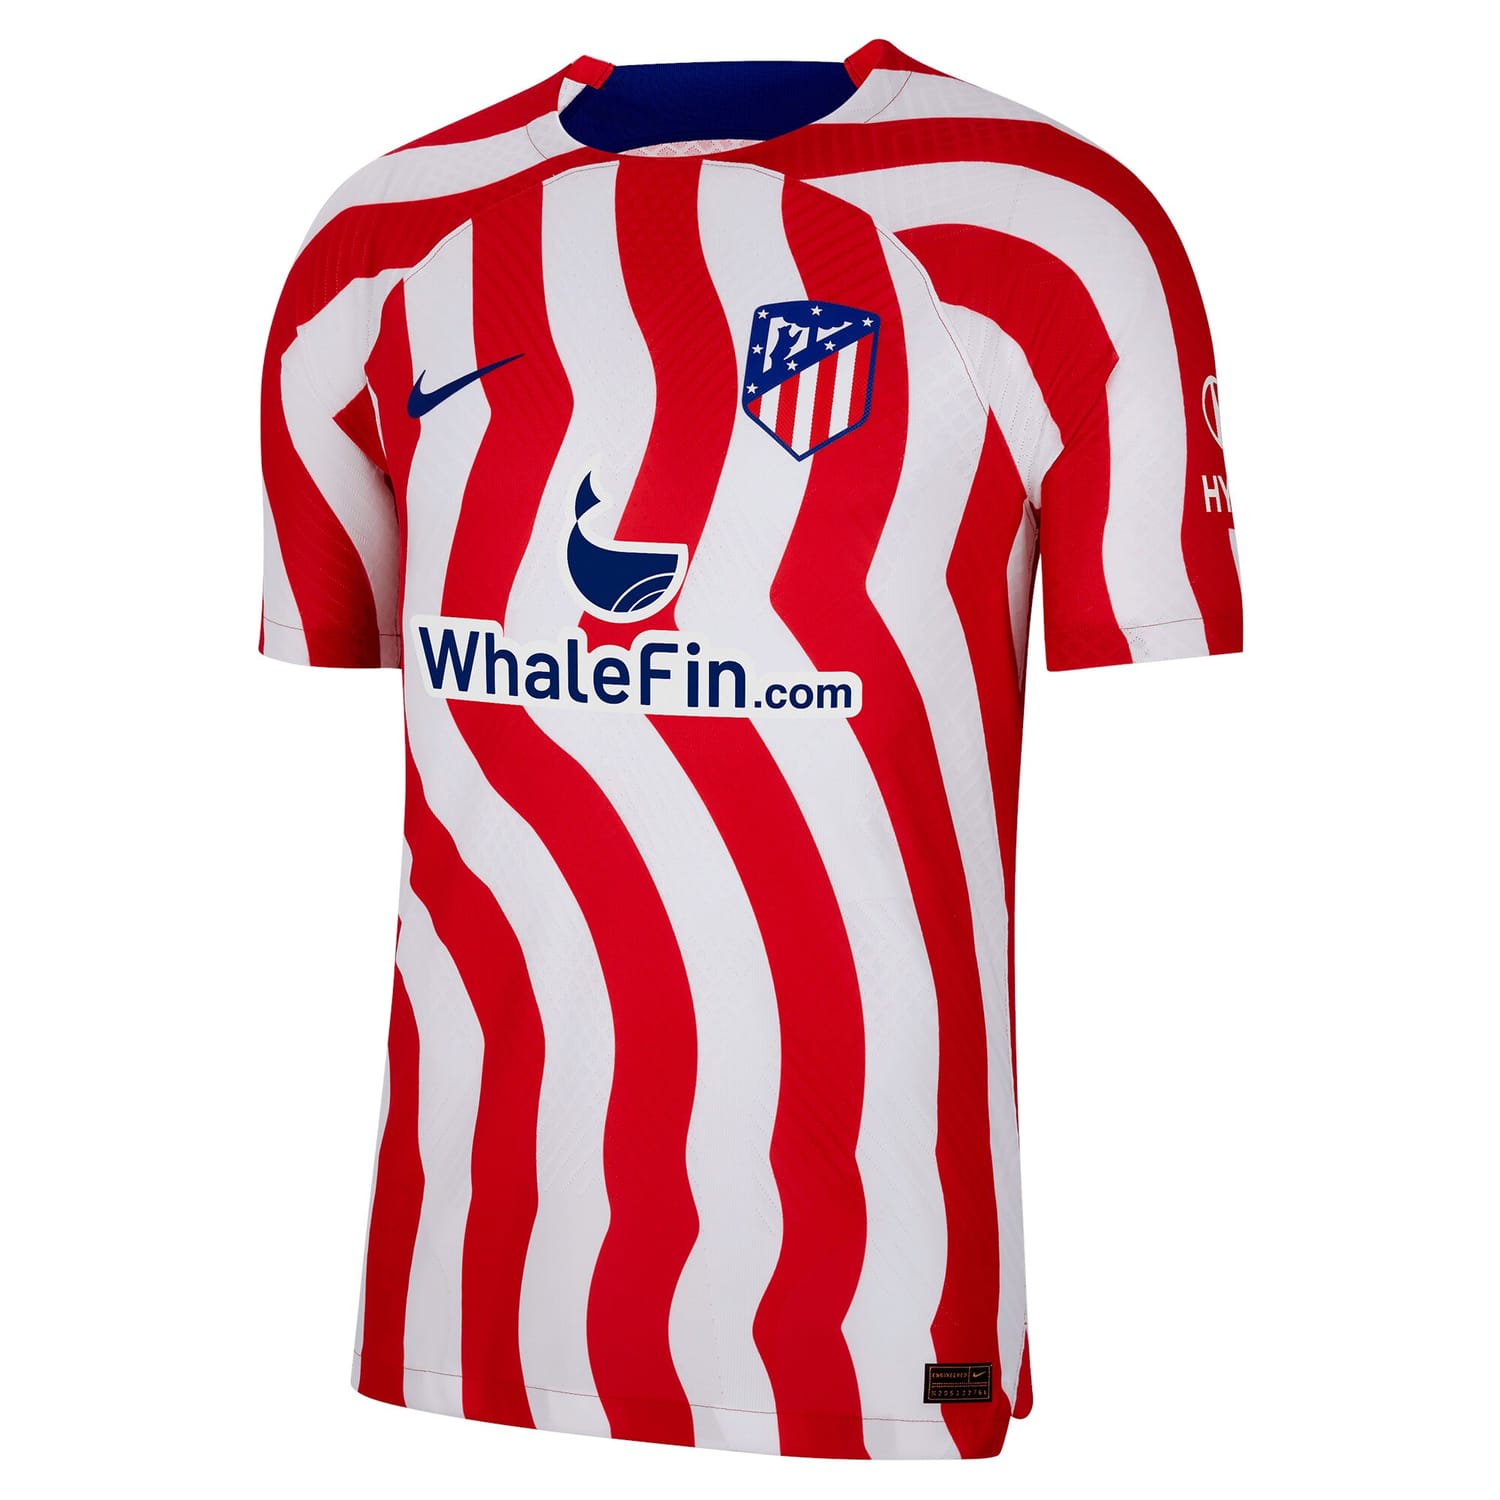 La Liga Atletico de Madrid Home Authentic Jersey Shirt 2022-23 player Axel Witsel 20 printing for Men